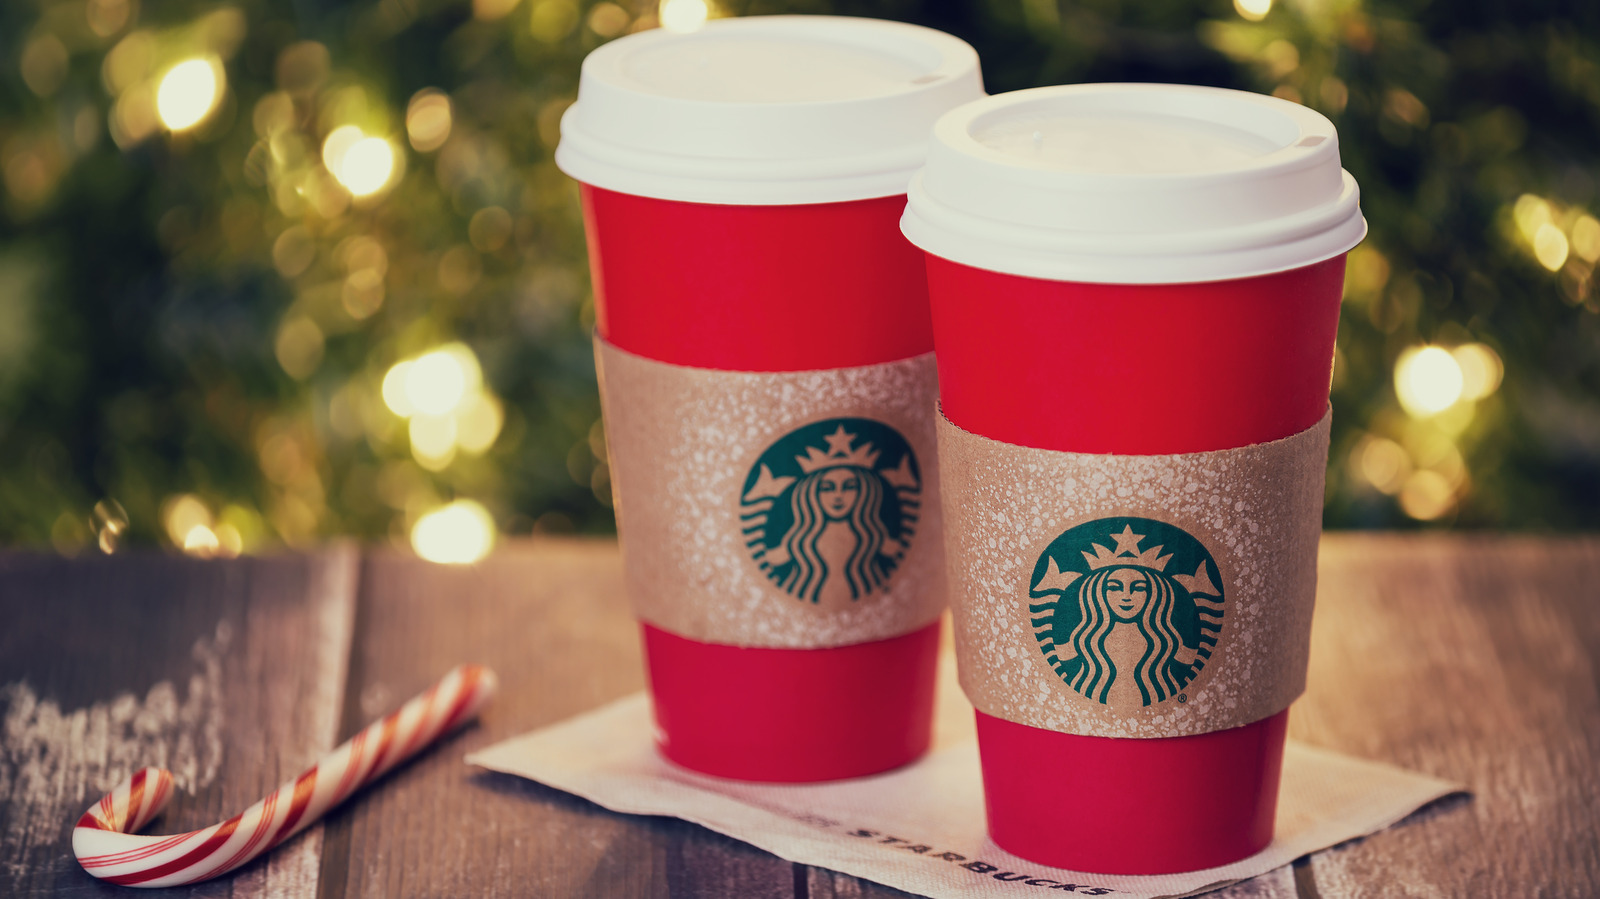 Is Starbucks Open On New Year's Day 2022?